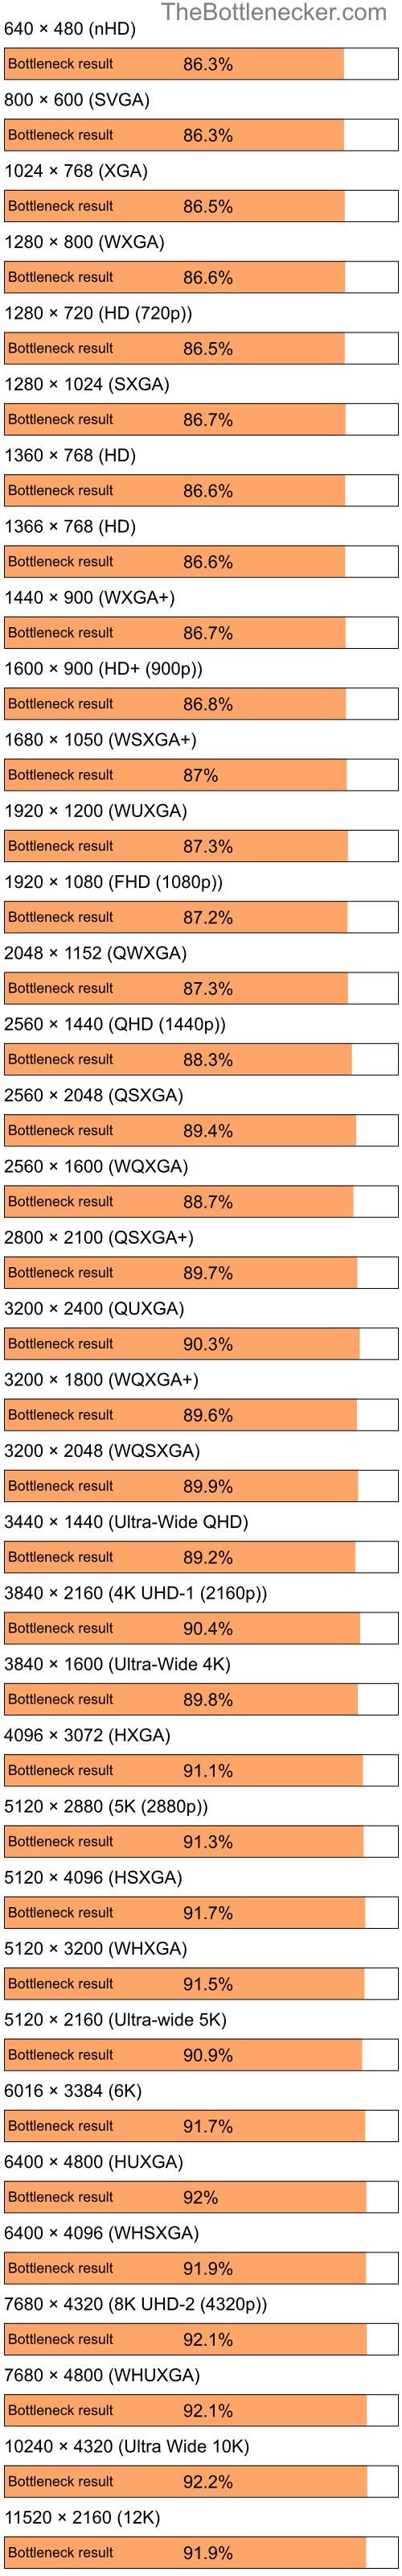 Bottleneck results by resolution for Intel Pentium 4 and NVIDIA GeForce Go 6100 in Graphic Card Intense Tasks